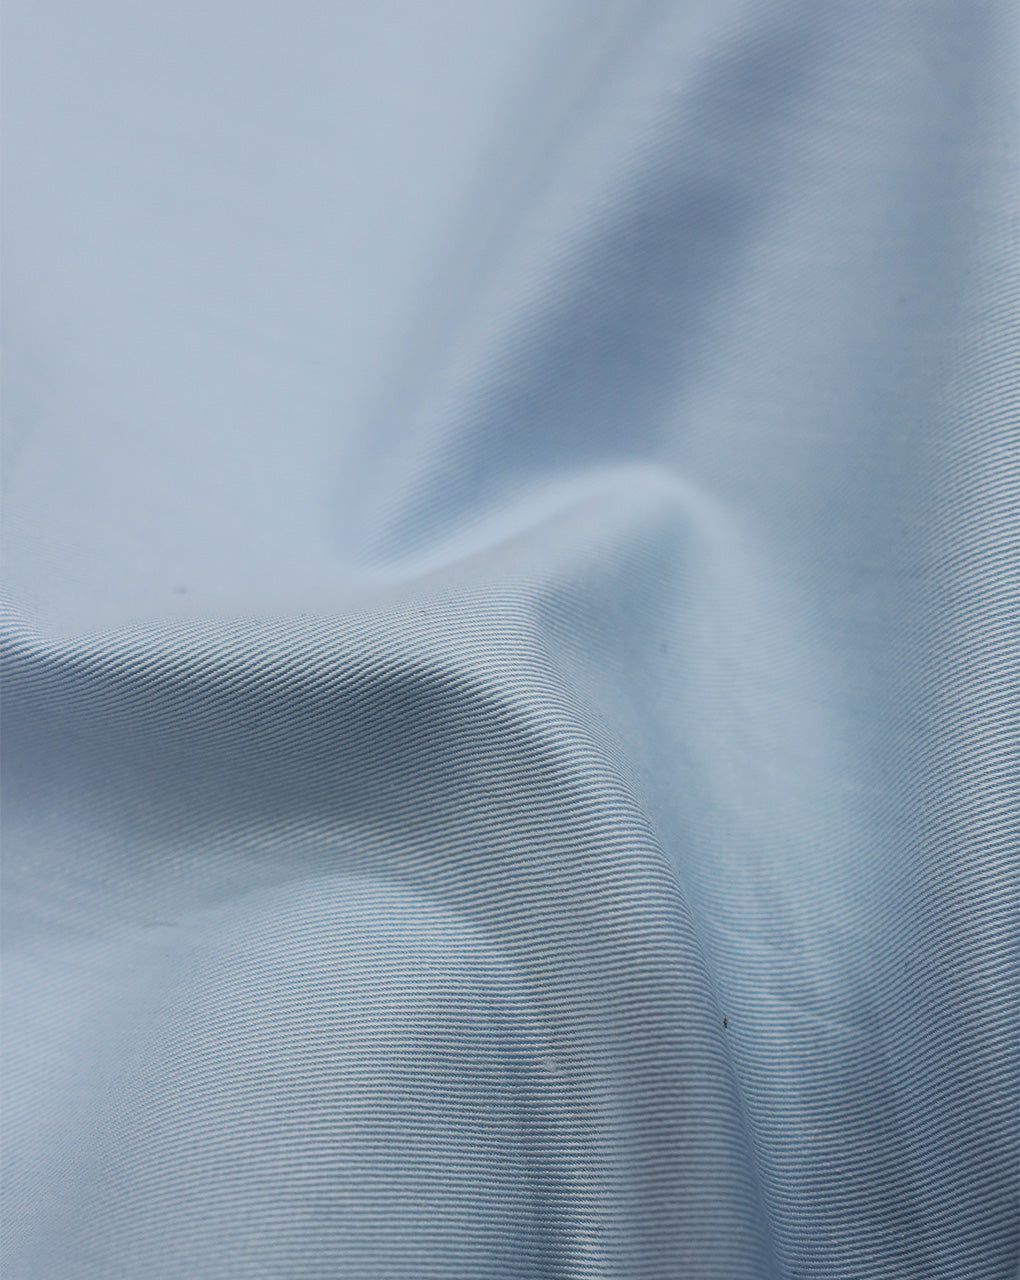 LIGHT SKY BLUE GIZA COTTON FABRIC (WIDTH - 58 INCHES)